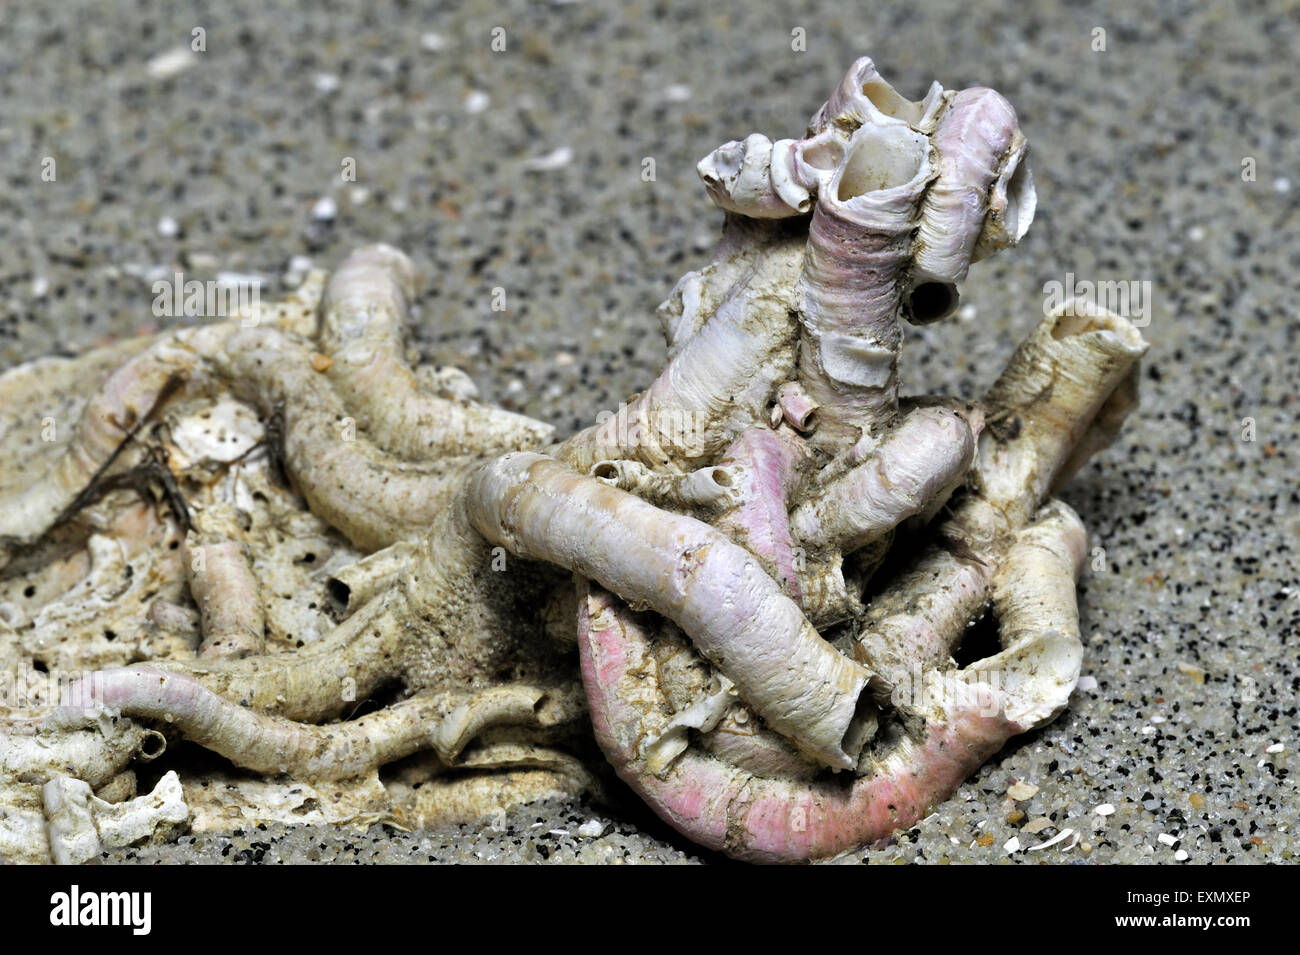 Tubes of of calcium carbonate from a serpulid worm on seashell washed on beach Stock Photo